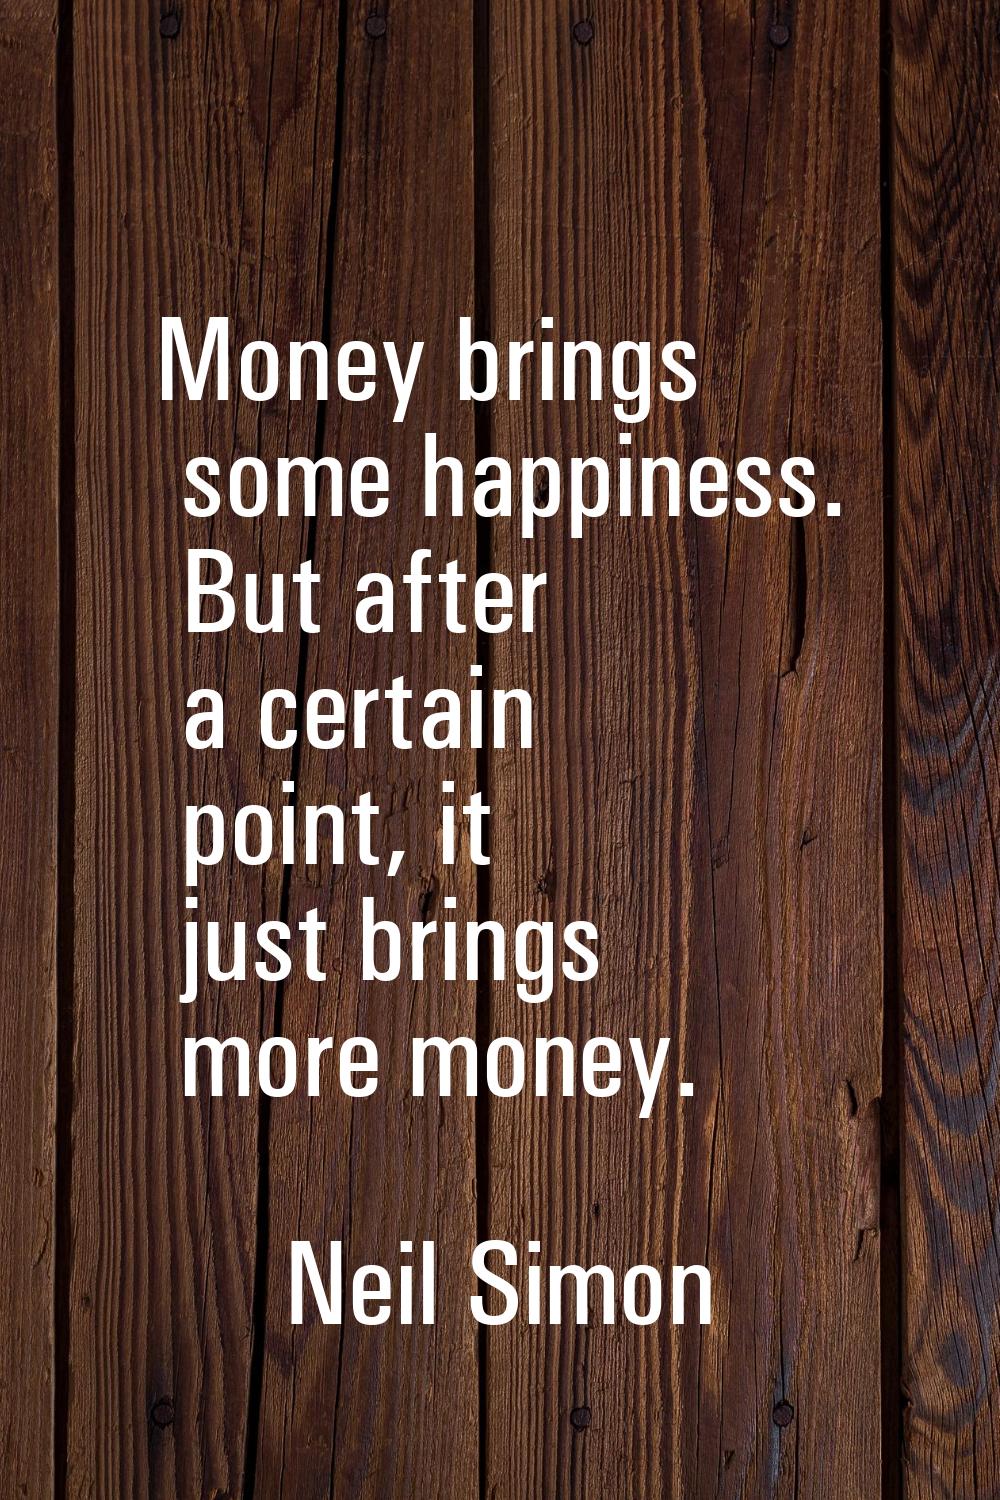 Money brings some happiness. But after a certain point, it just brings more money.